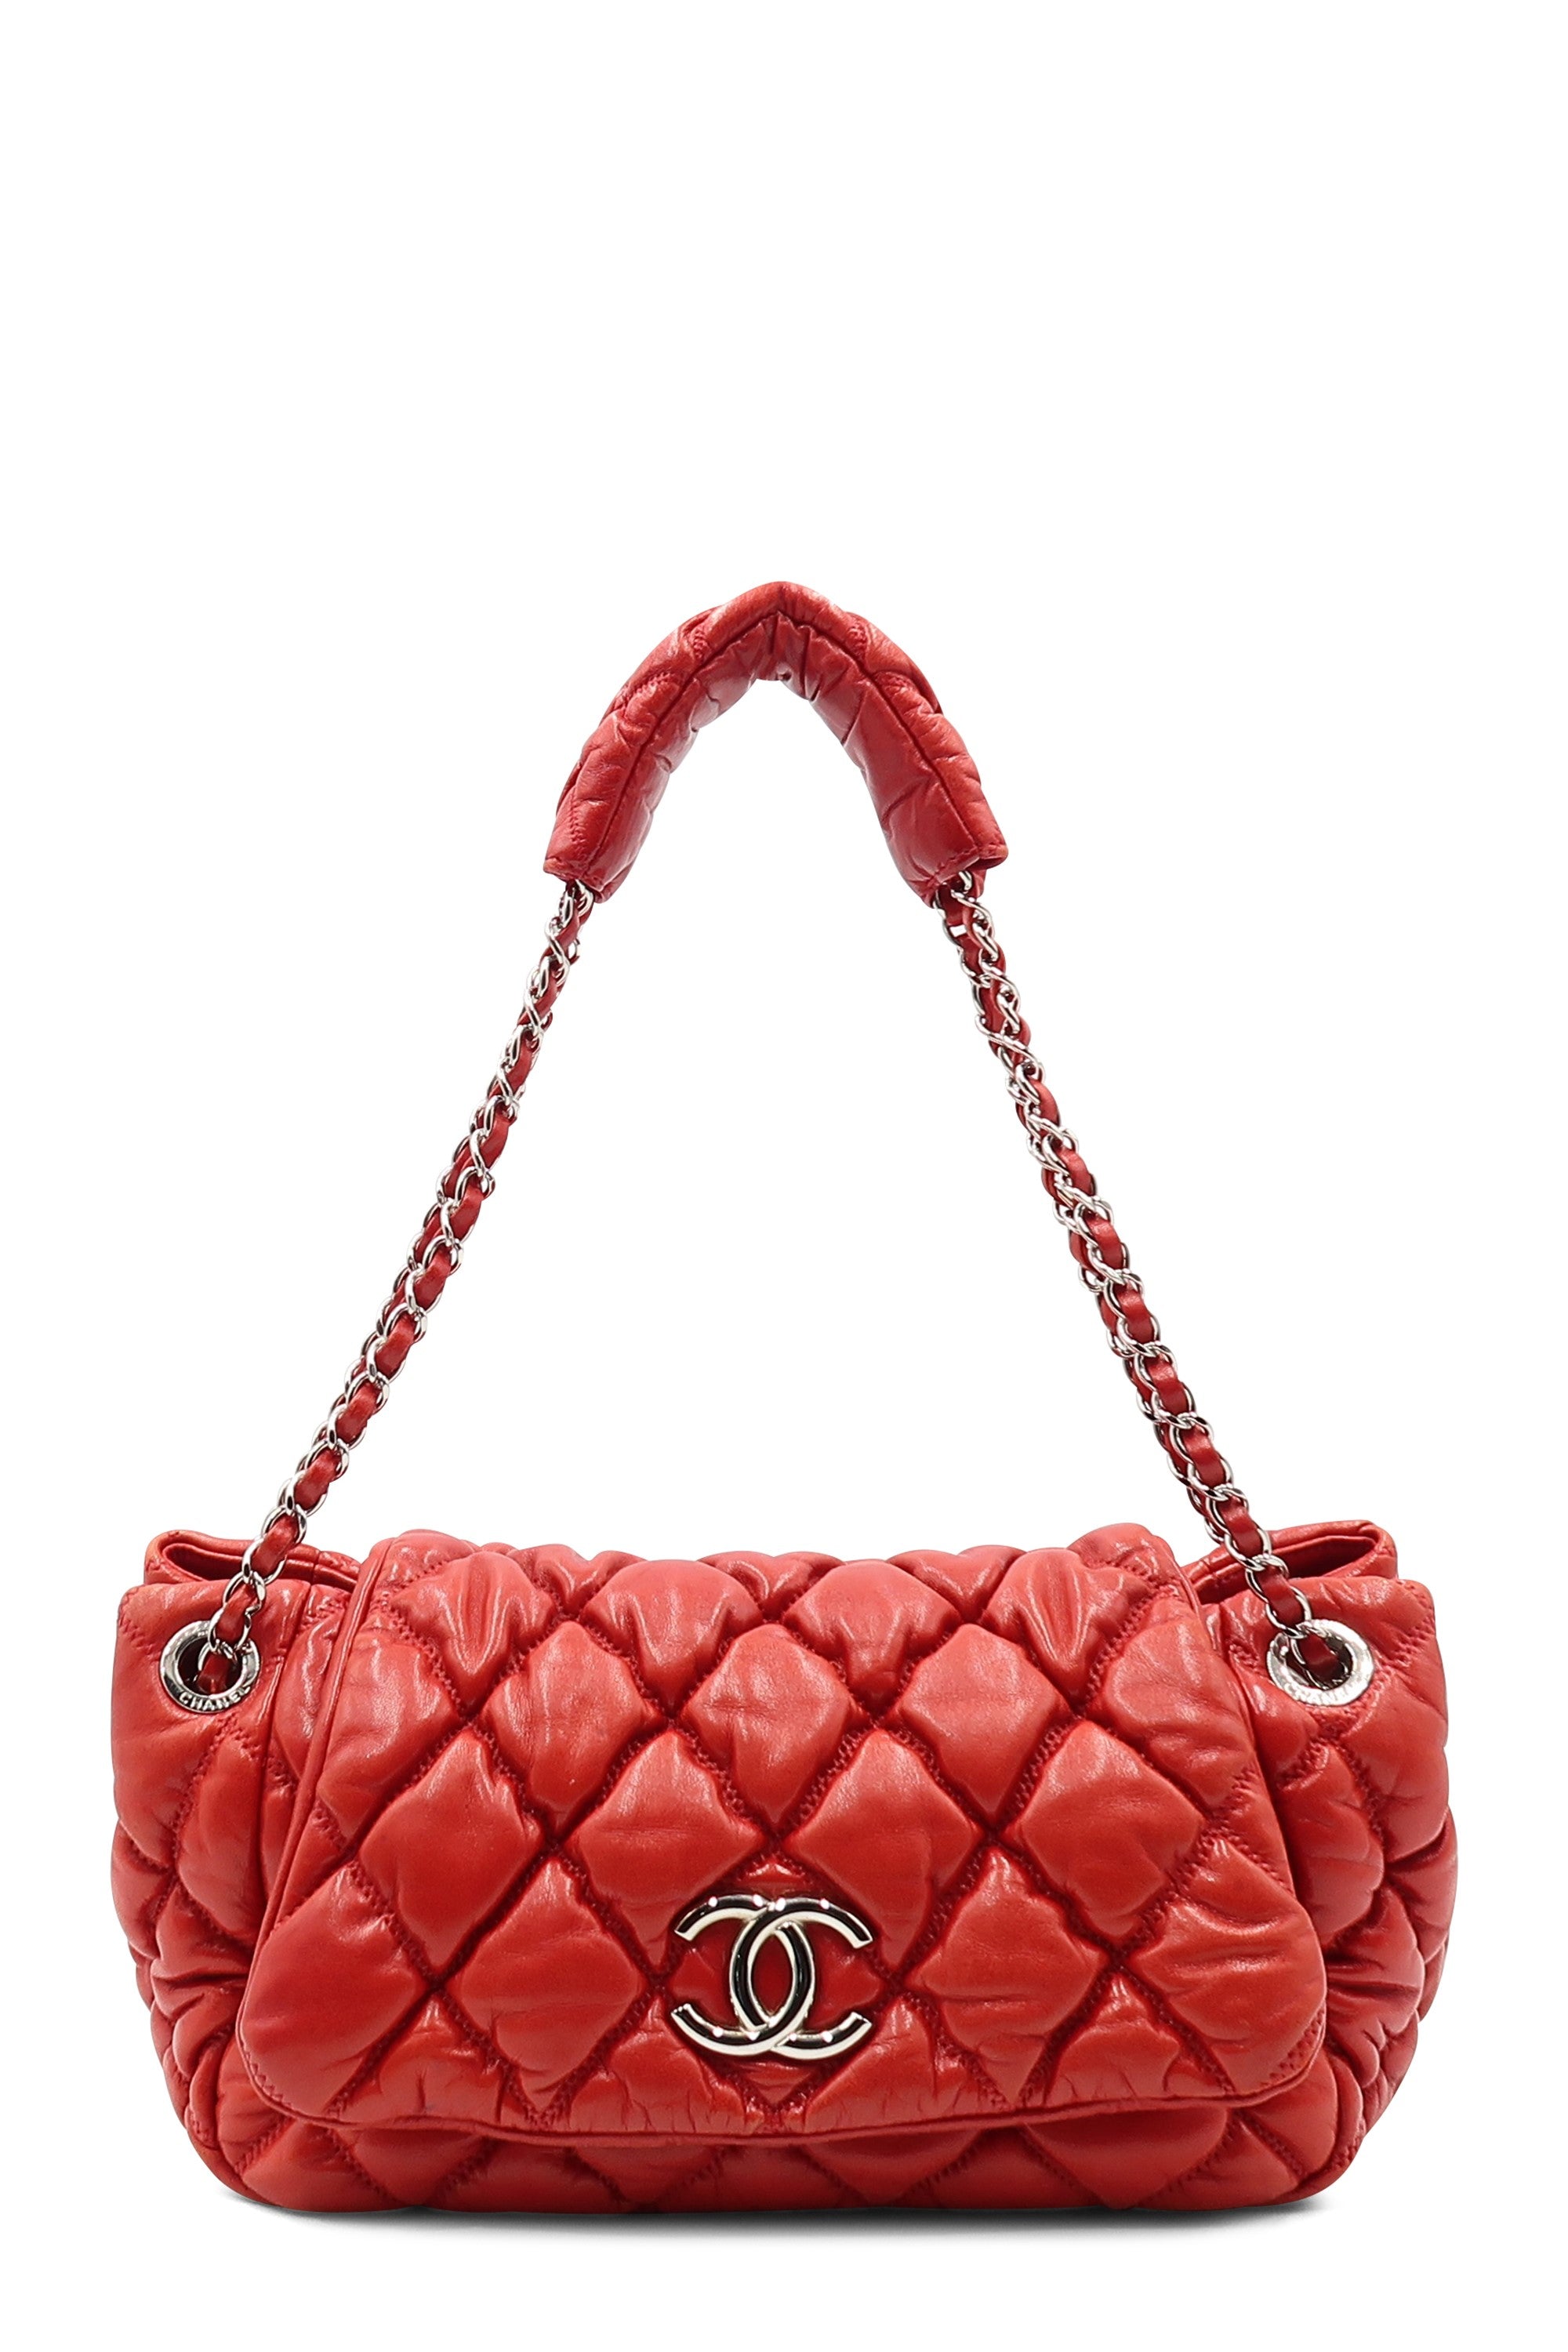 Sold at Auction: CHANEL BROWN LAMBSKIN BUBBLE QUILTED SHOULDER BAG